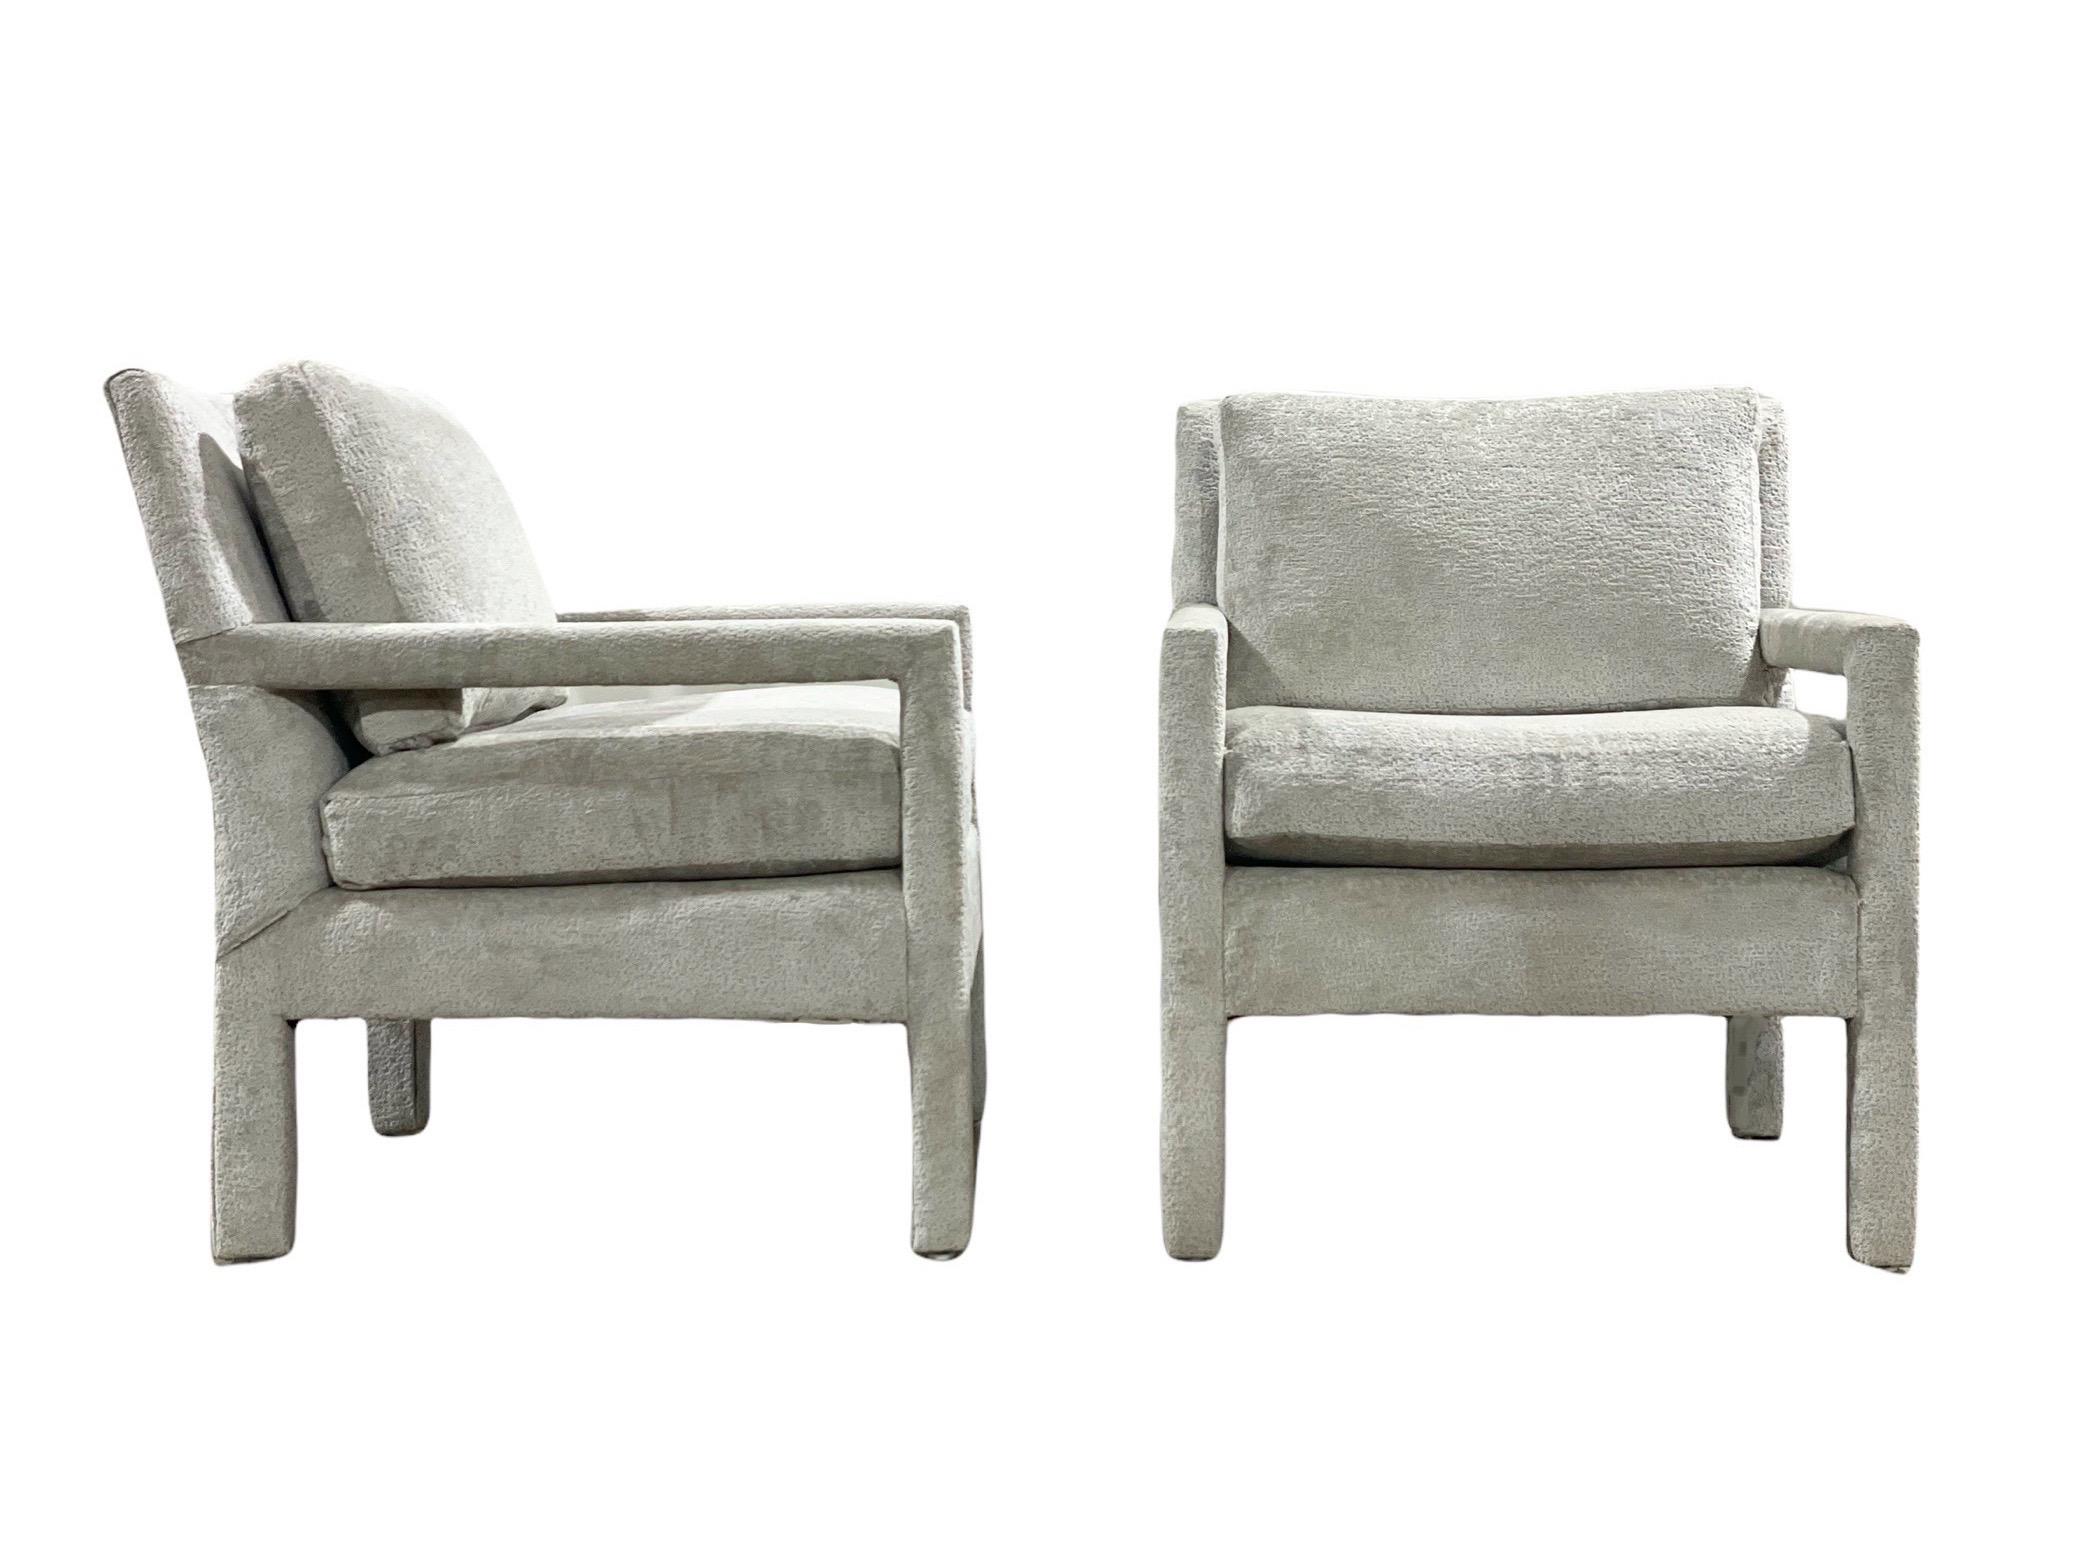 Pair Midcentury Parsons Style Lounge Chairs by Bernhardt, After Milo Baughman For Sale 2